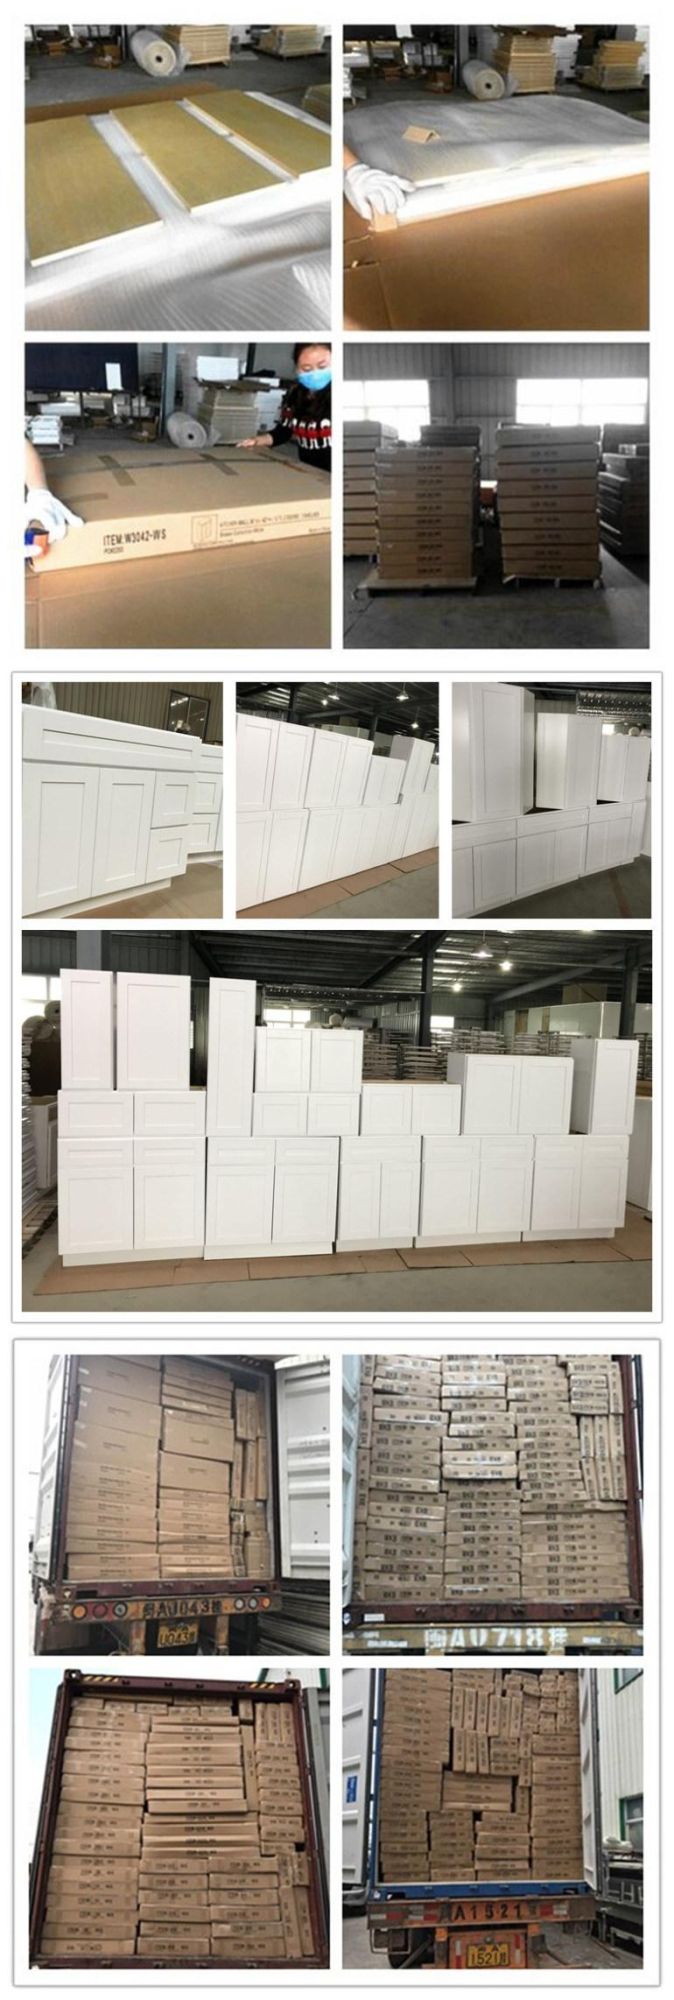 Manufacture Kitchen Cabinets White Shaker for Base Wall Pantry